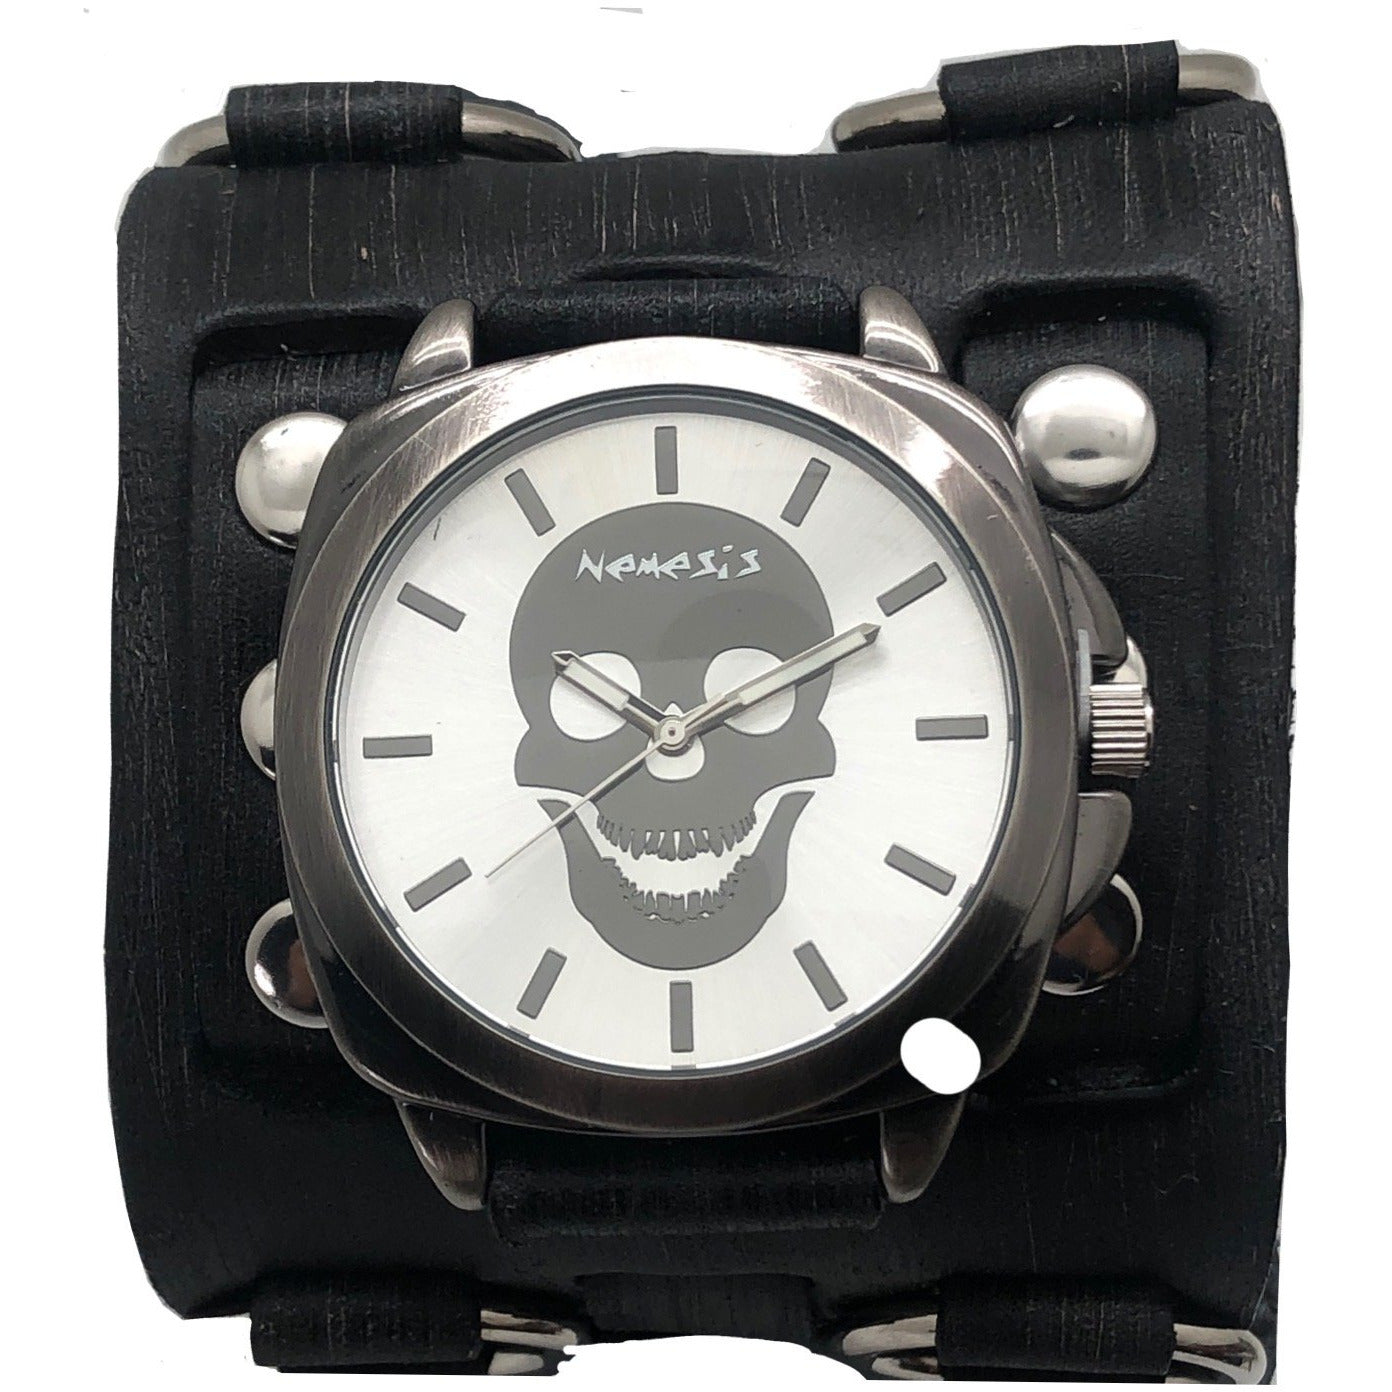 Skull Silver Watch with Ring Distressed Black Leather Triple Strap Cuff